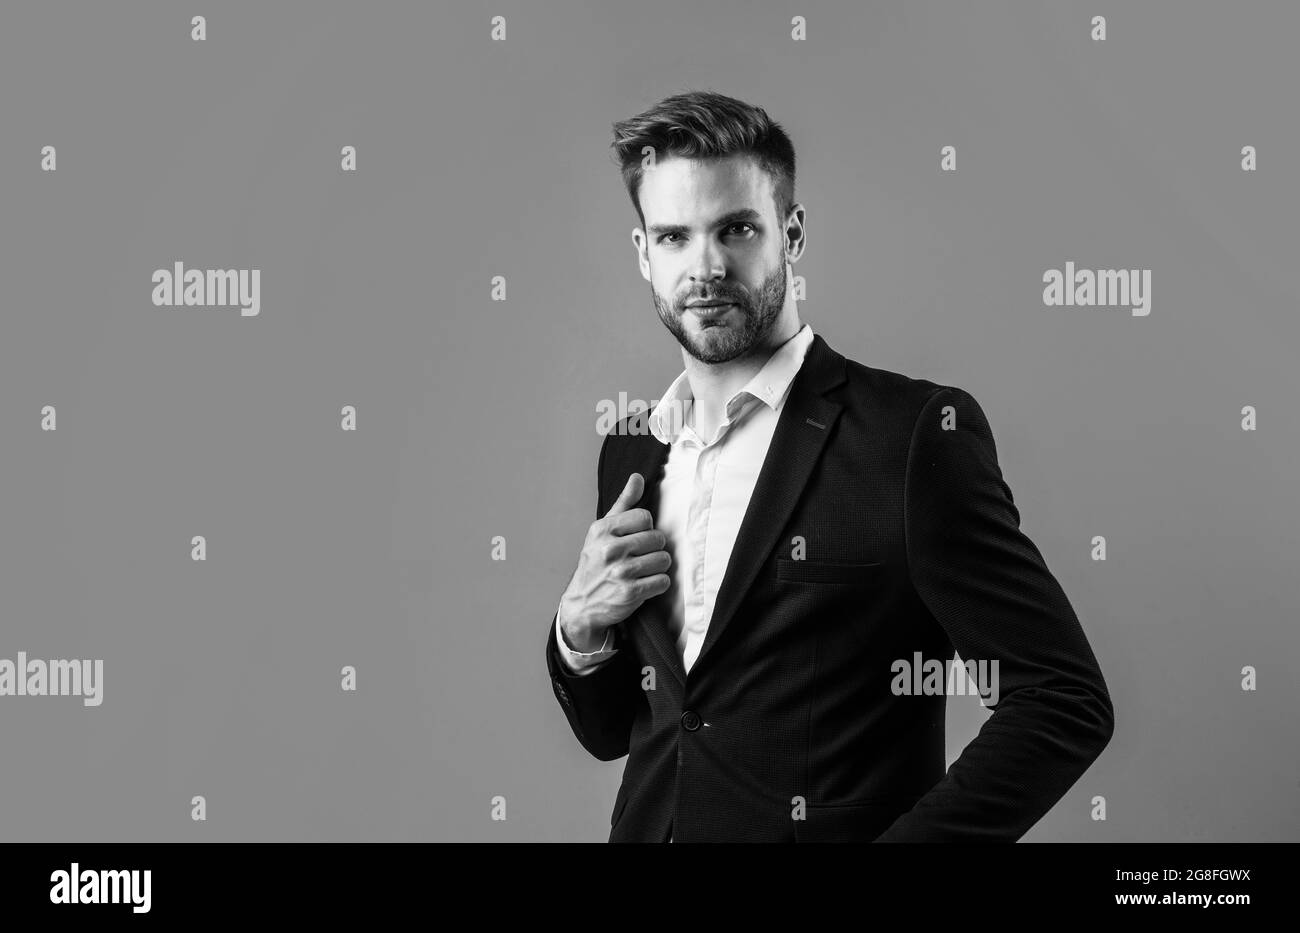 In his own style. well groomed hairstyle. male beauty and fashion look.  formal office costume for bearded guy. unshaven handsome man with bristle  Stock Photo - Alamy